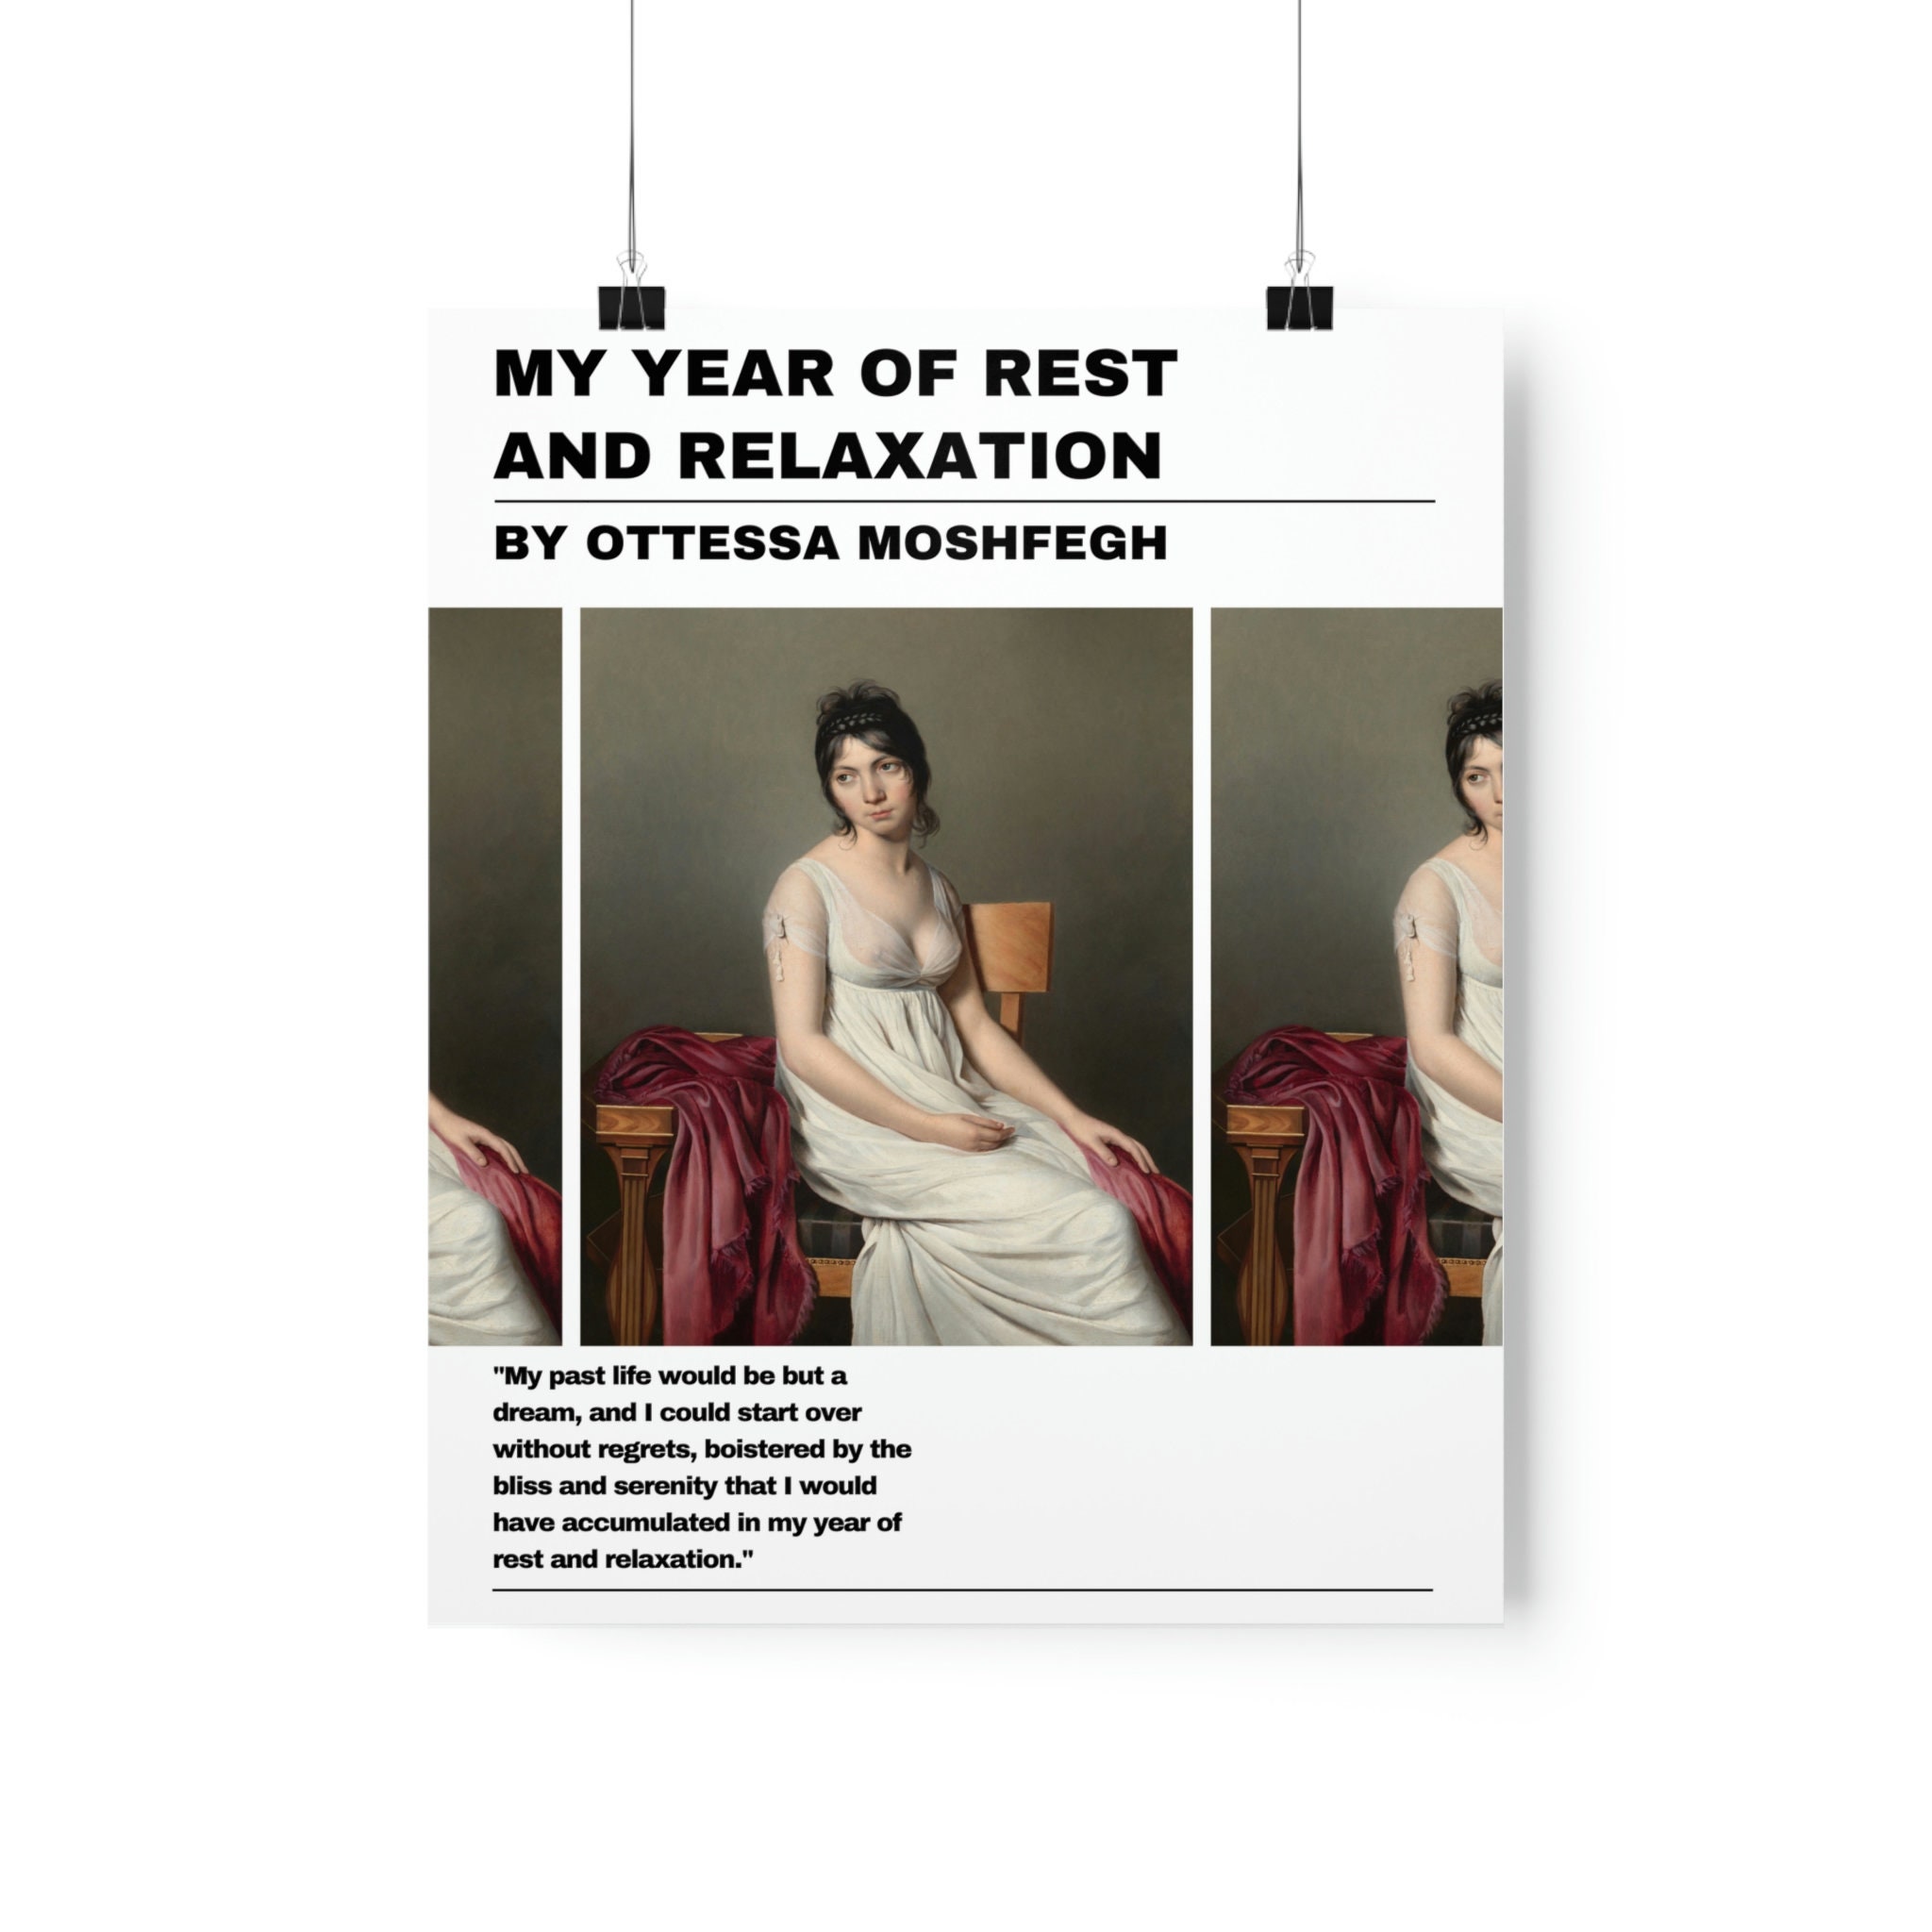 MY YEAR OF REST AND RELAXATION - broché - Ottessa Moshfegh - Achat